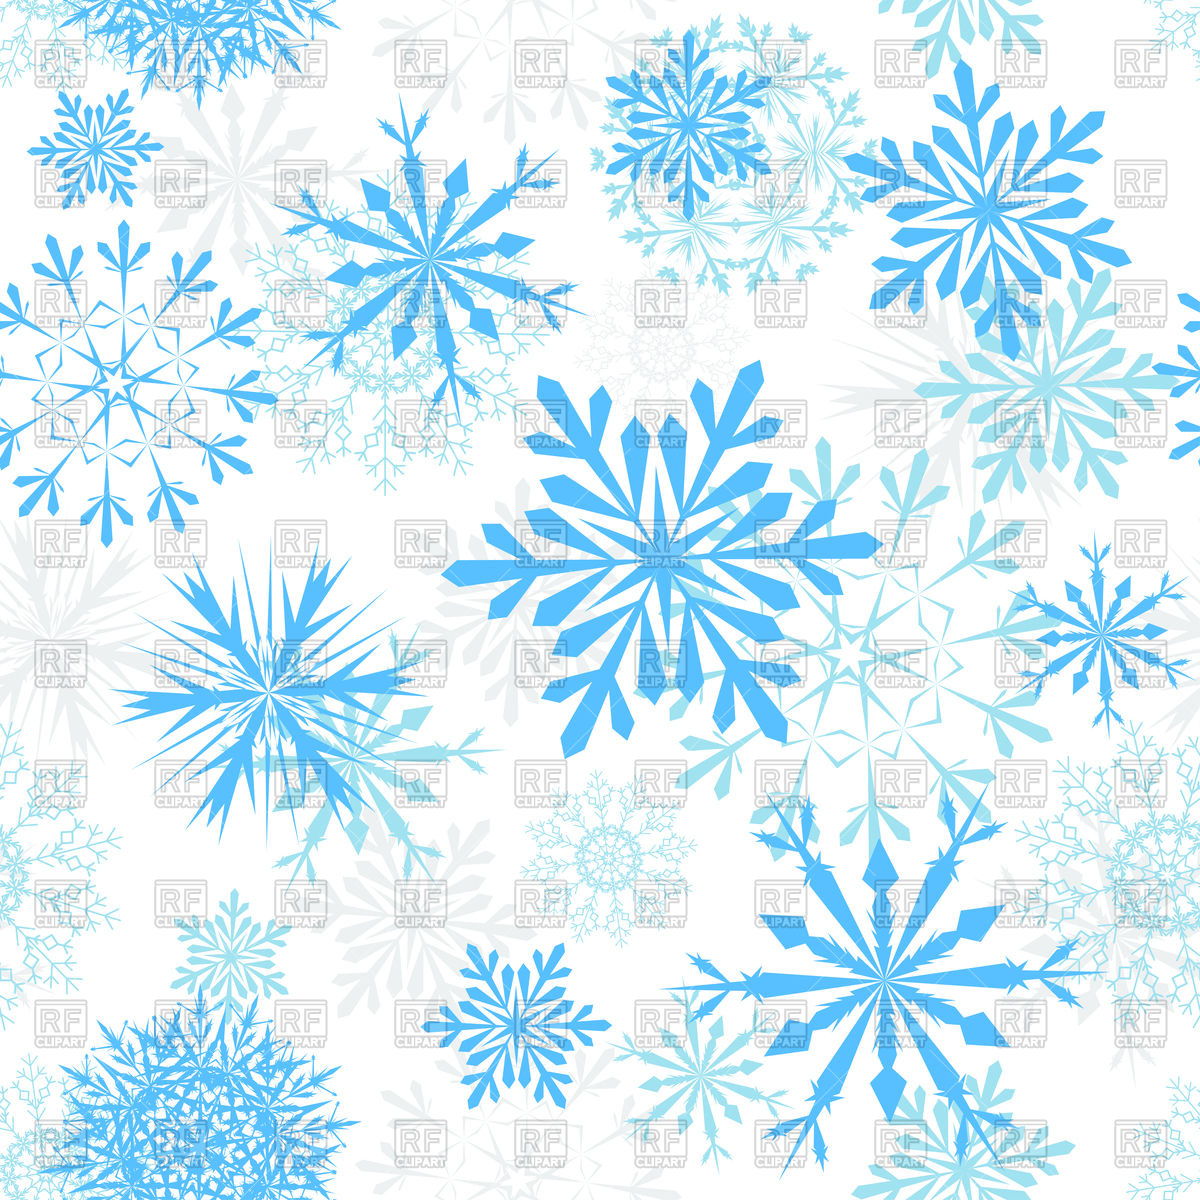 Free Snowflake Background Cliparts, Download Free Clip Art